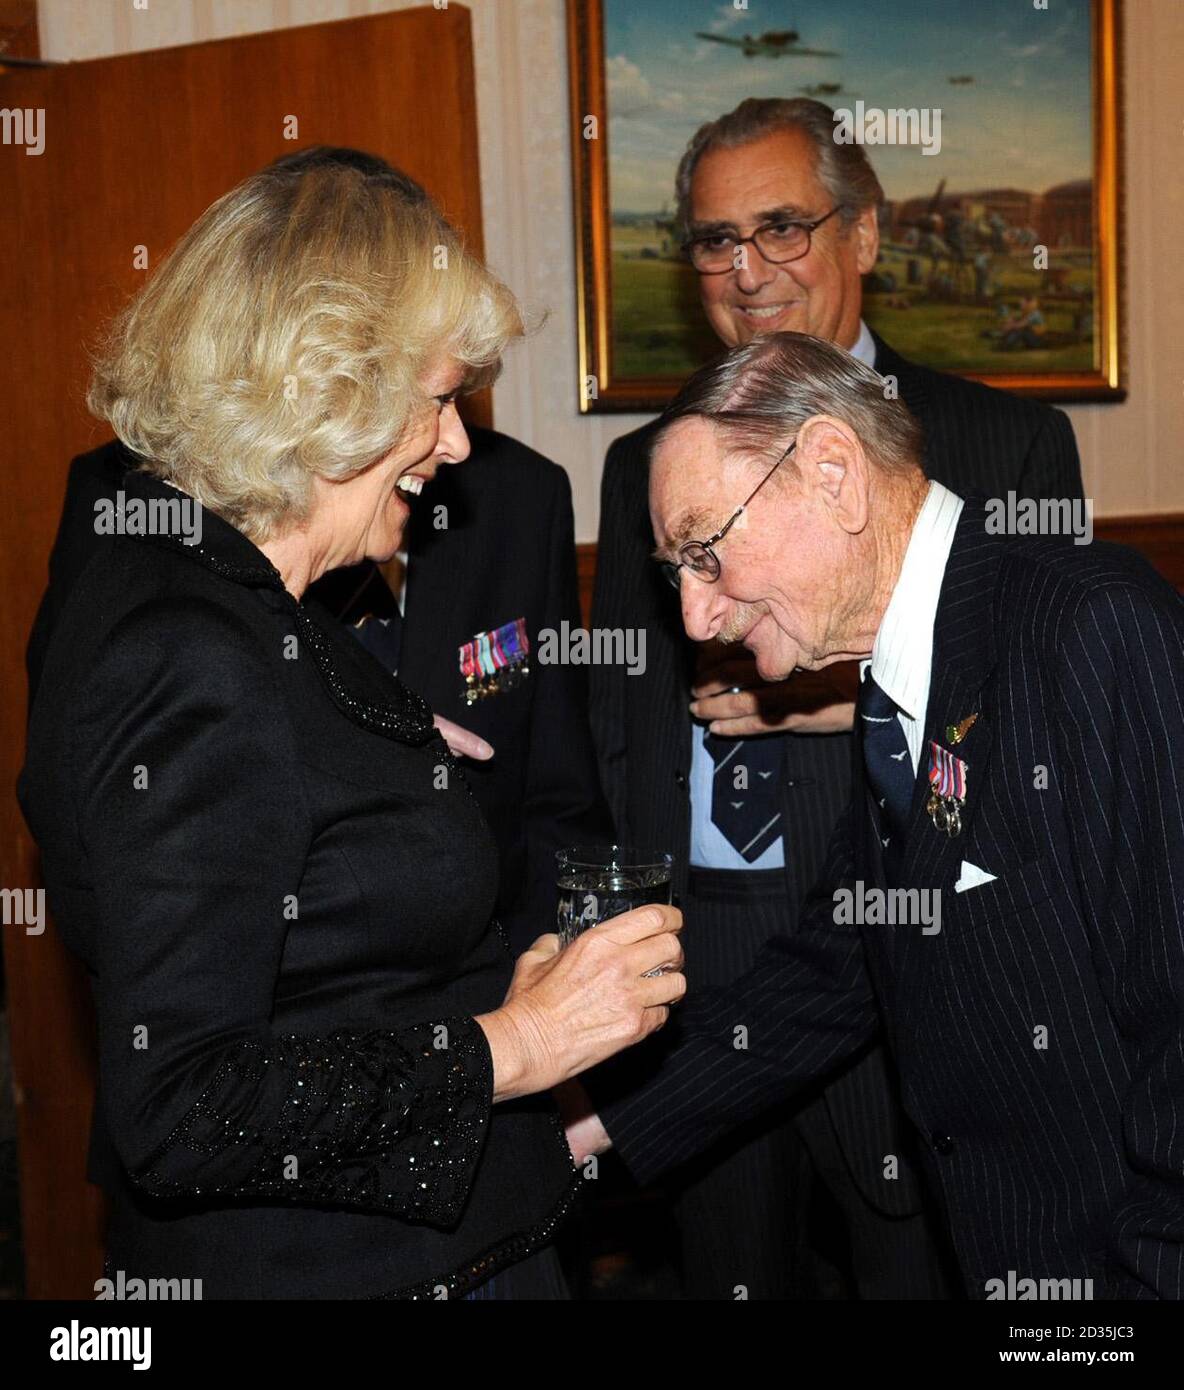 The Duchess of Cornwall speaks with RAF Ex-Prisoners of War (names not known) at RAF Henlow, Bedfordshire where she attended an RAF Ex- Prisoners of War Association dinner. Stock Photo